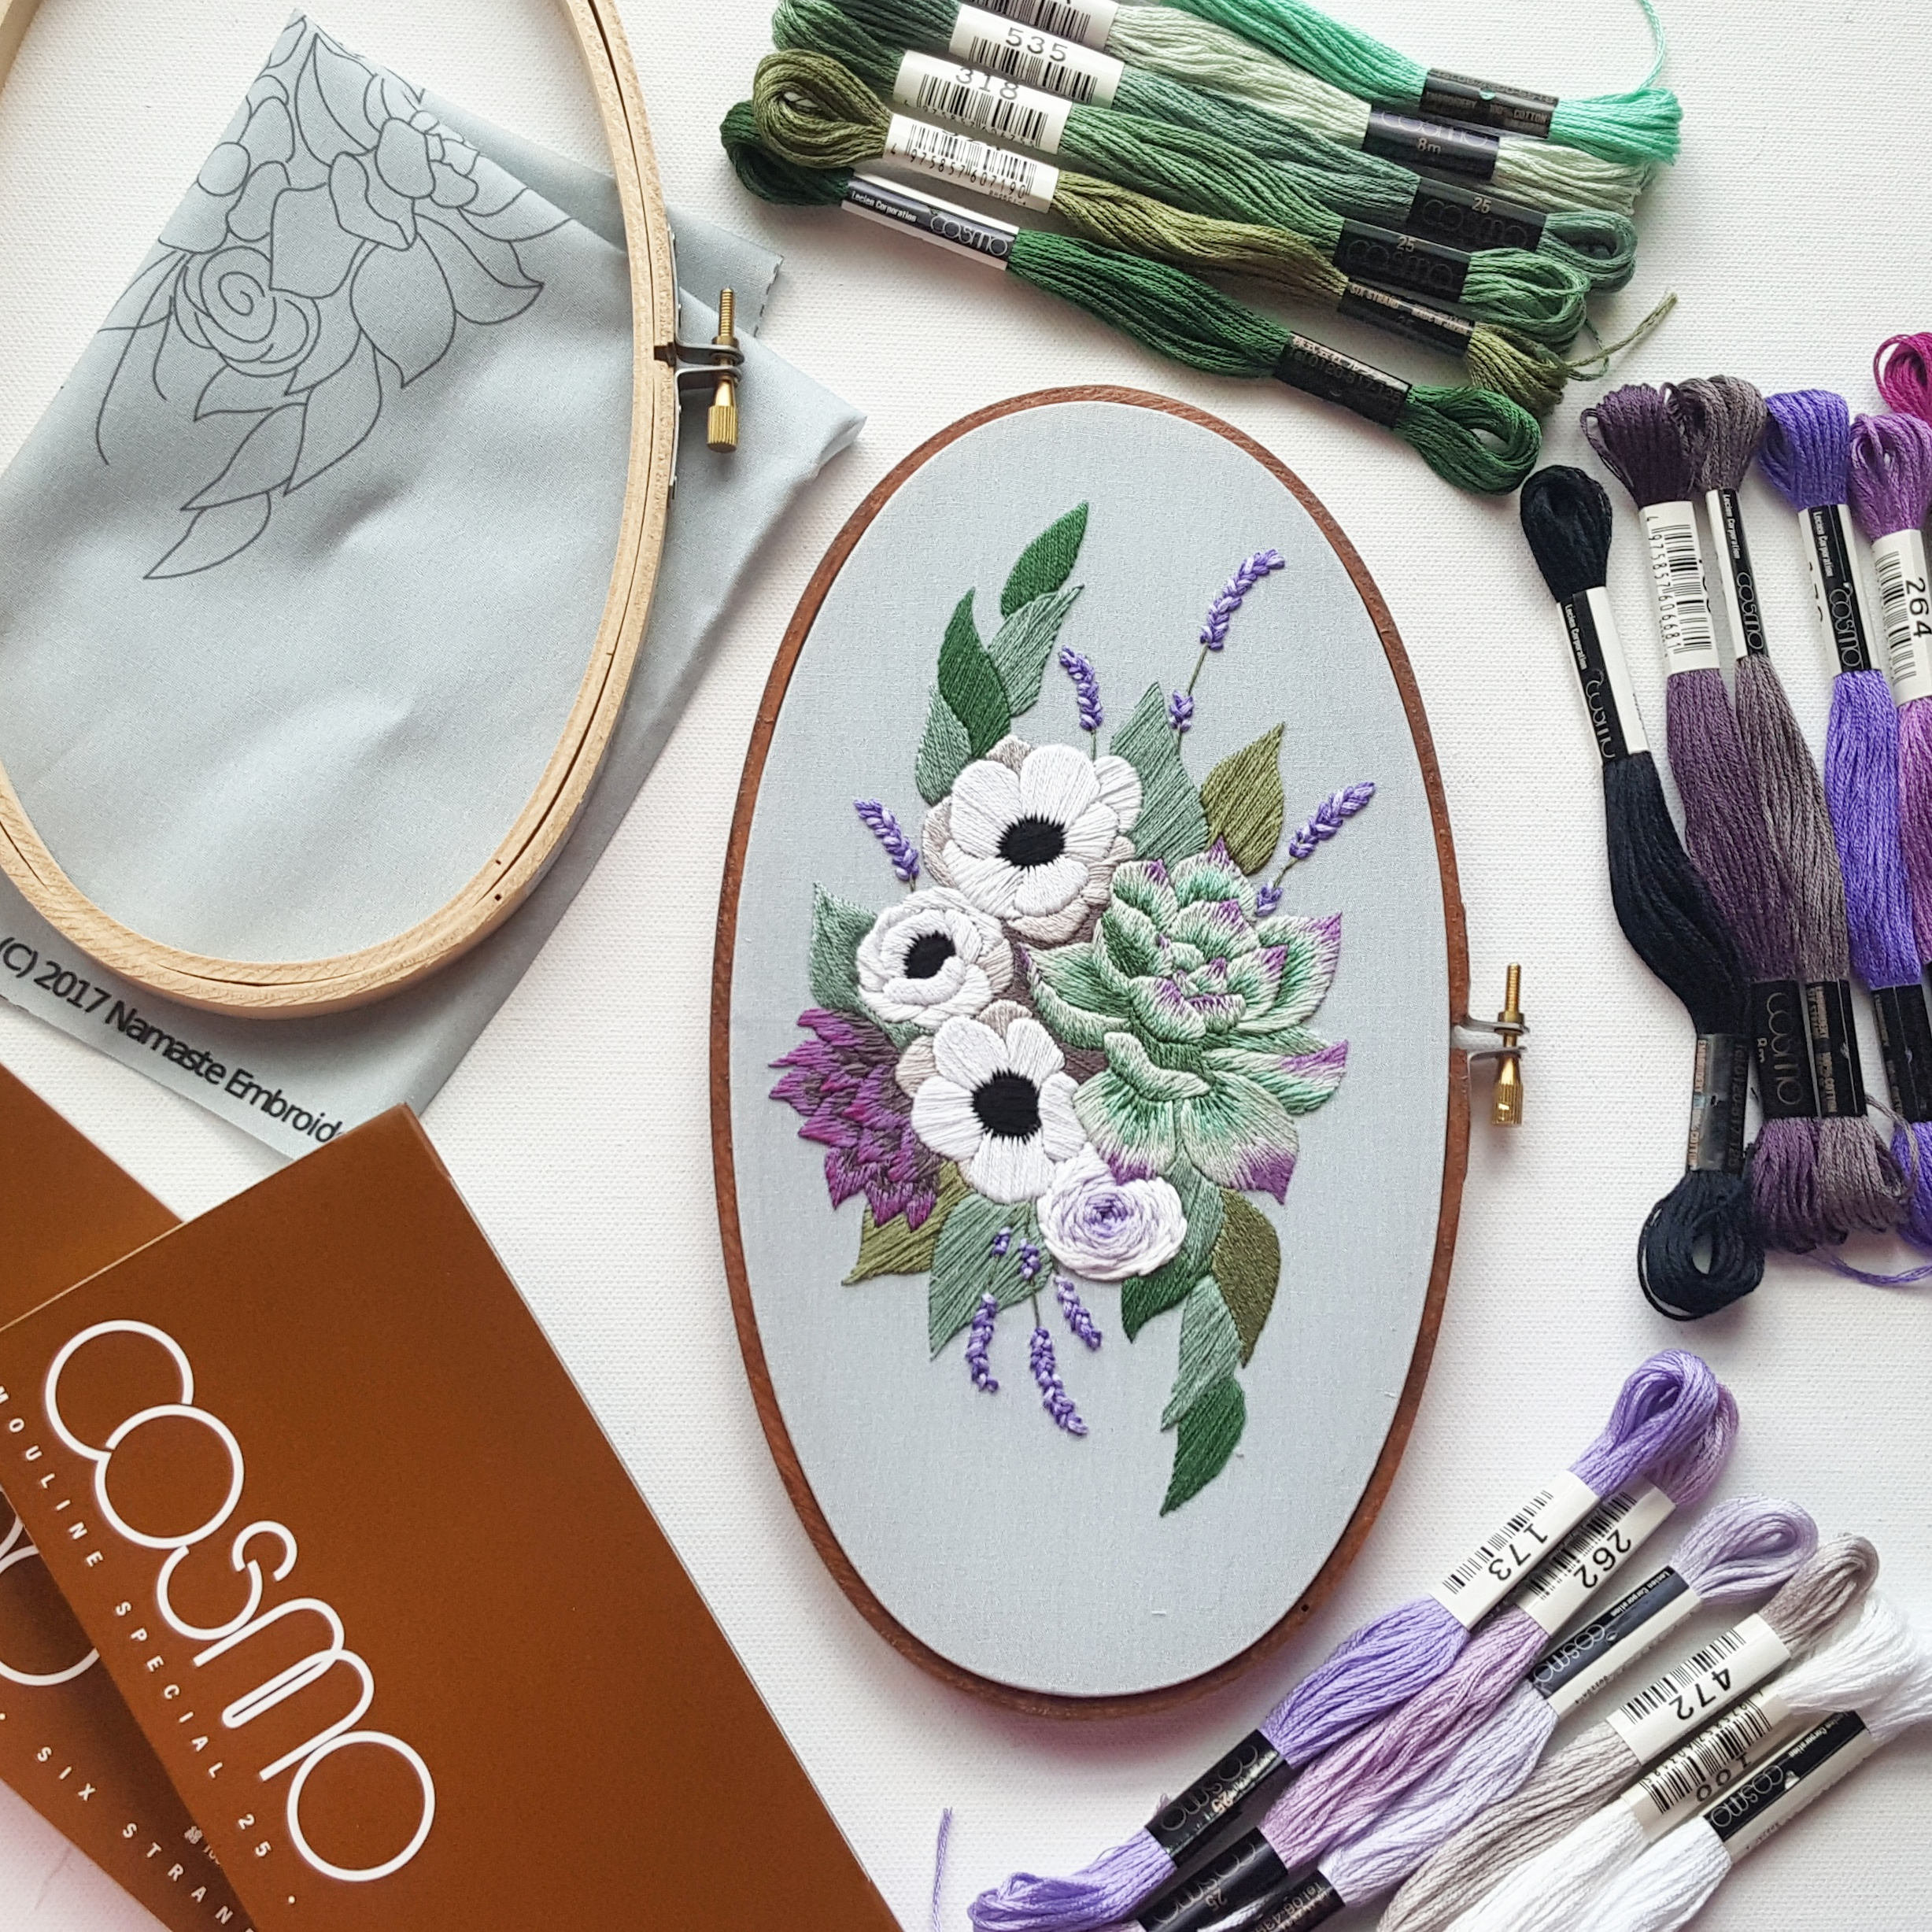 Combine Thread and Painting With These Embroidery Supplies